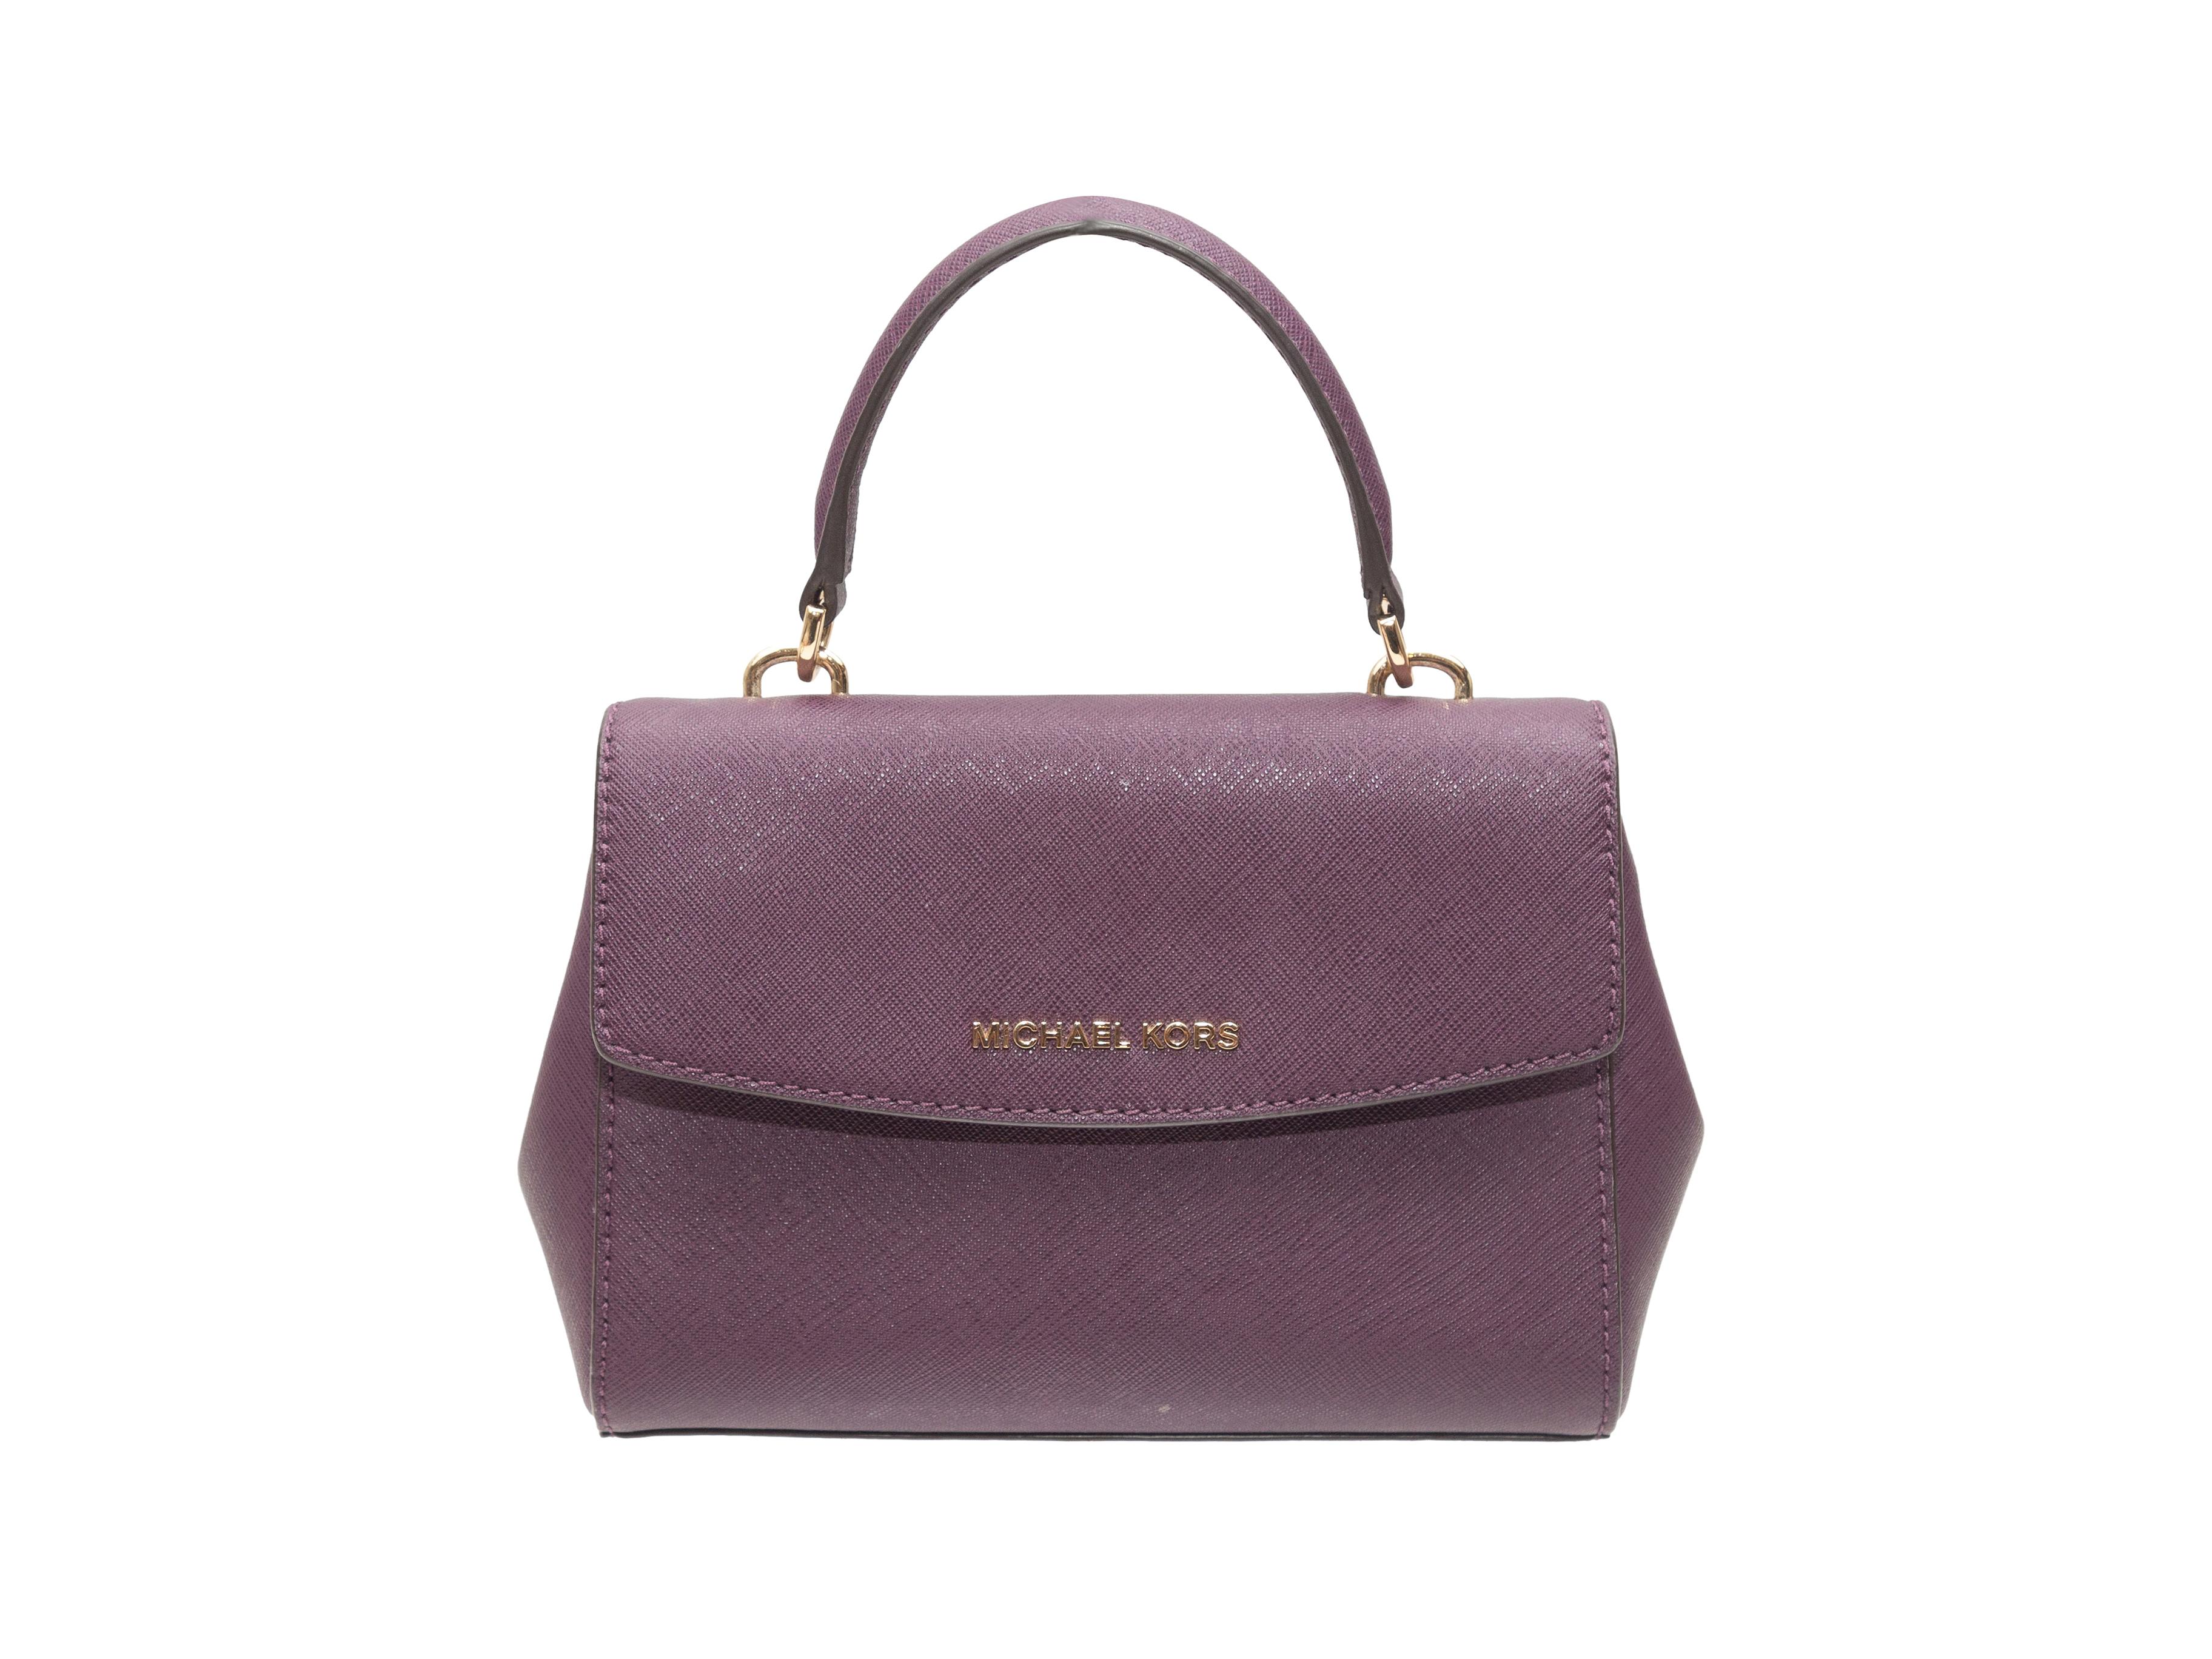 Product Details: Eggplant Michael Kors Leather Mini Handbag. This handbag features a leather body, gold-tone hardware, a single top handle, an optional shoulder strap, and front flap closure. 7